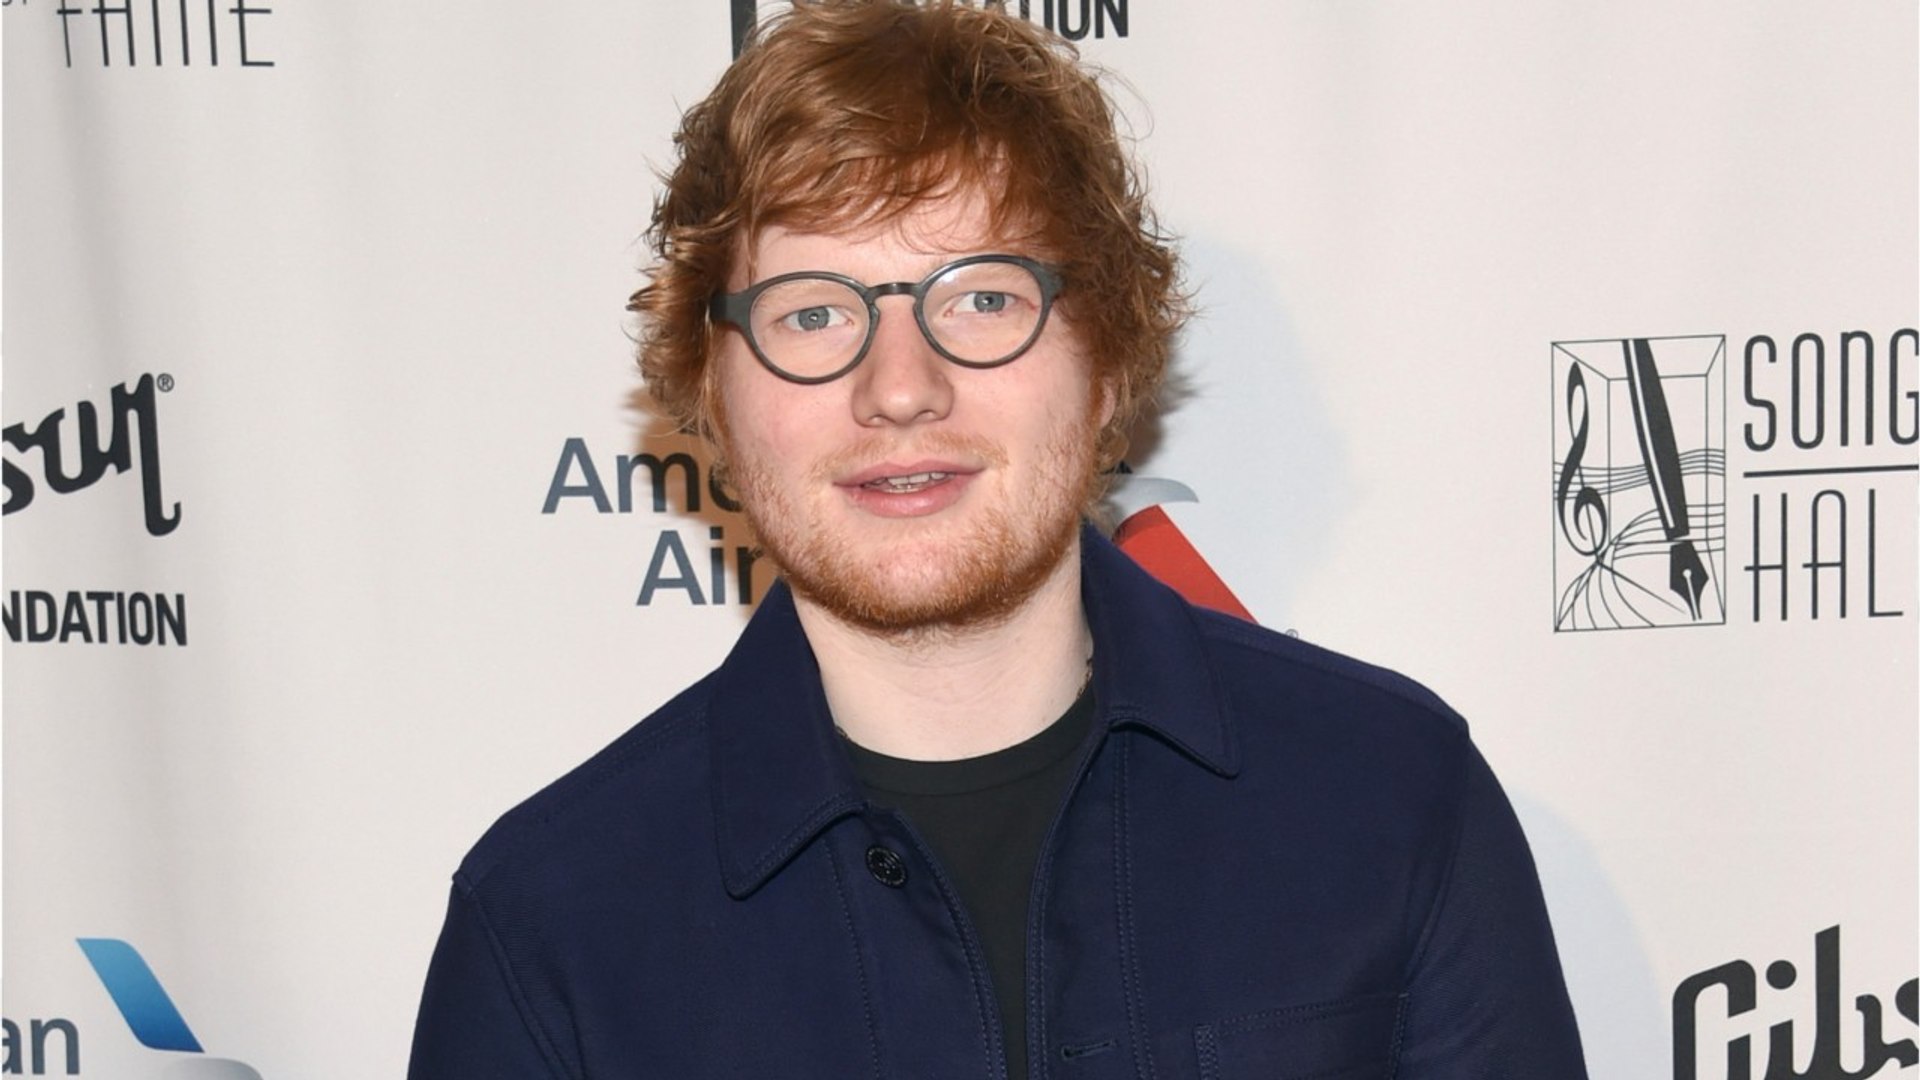 Ed Sheeran Explains Why He Quit Twitter, And It Wasn’t Because Of ‘Game Of Thrones’